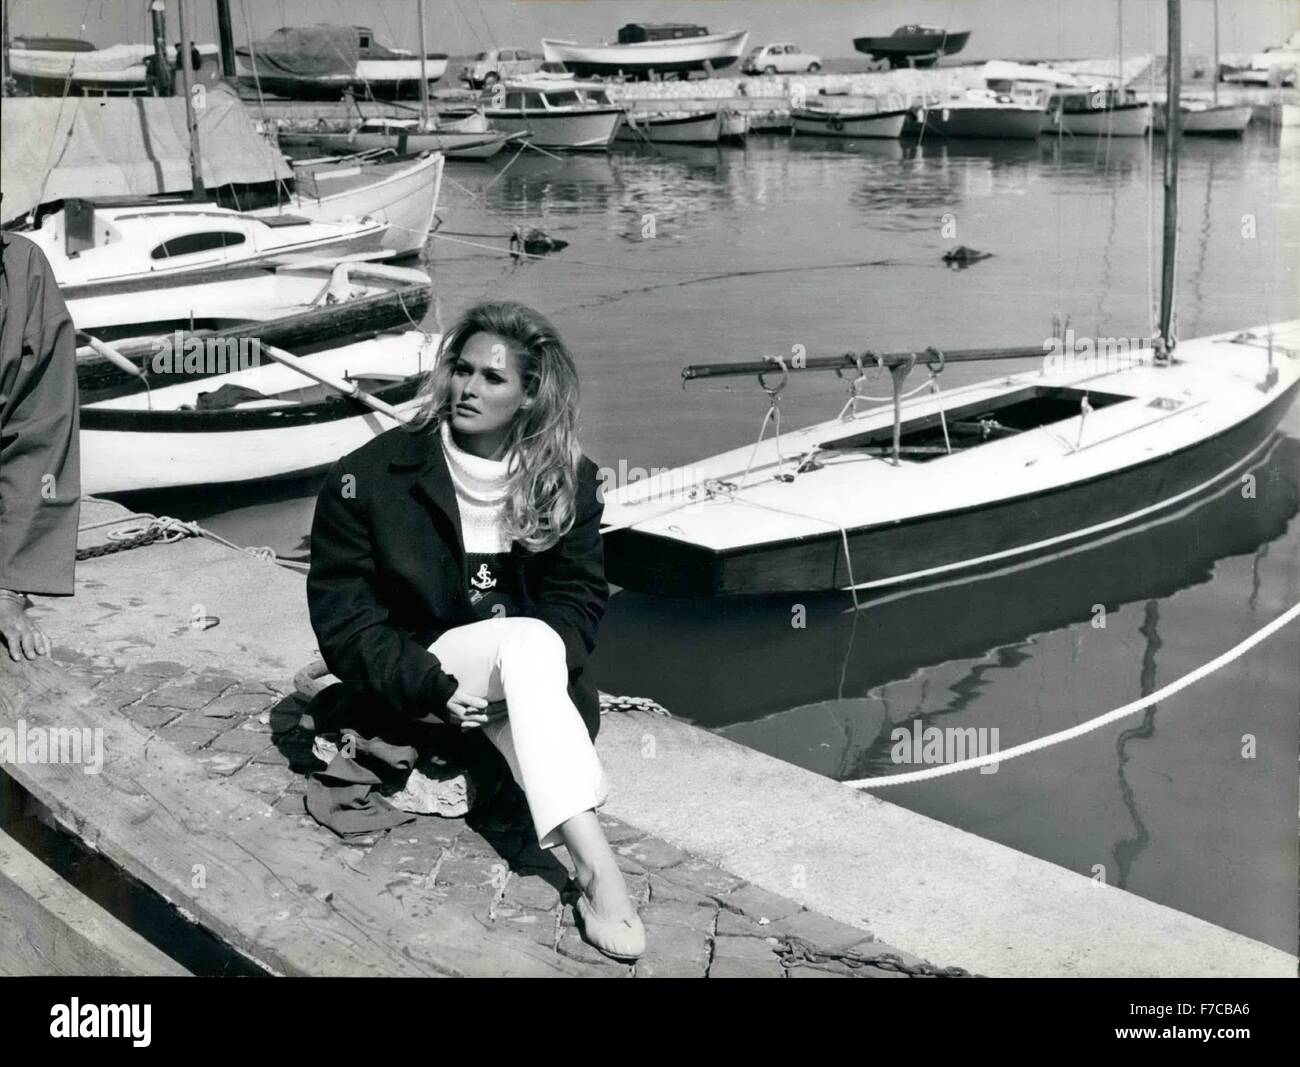 1968 - Ursula Andress comes back to Rome.: Blonde-beautiful Swiss actress Ursula Andress partner of Sean Connery in James Bond series came  ok to Rome yesterday. The Icy Sphynx as she it called at Hollywood lived here in Rome for several years before to begin her billant movie career. She had many friends here and  declared to be happy to see again the gardens and beautiful things there are in Rome. She was pictured this morning at Anzio where she opens an happy rest on the sunny little harbour on a yatch of some friends. Ursula will probably be filming in Rome next month. (Credit Image: Stock Photo